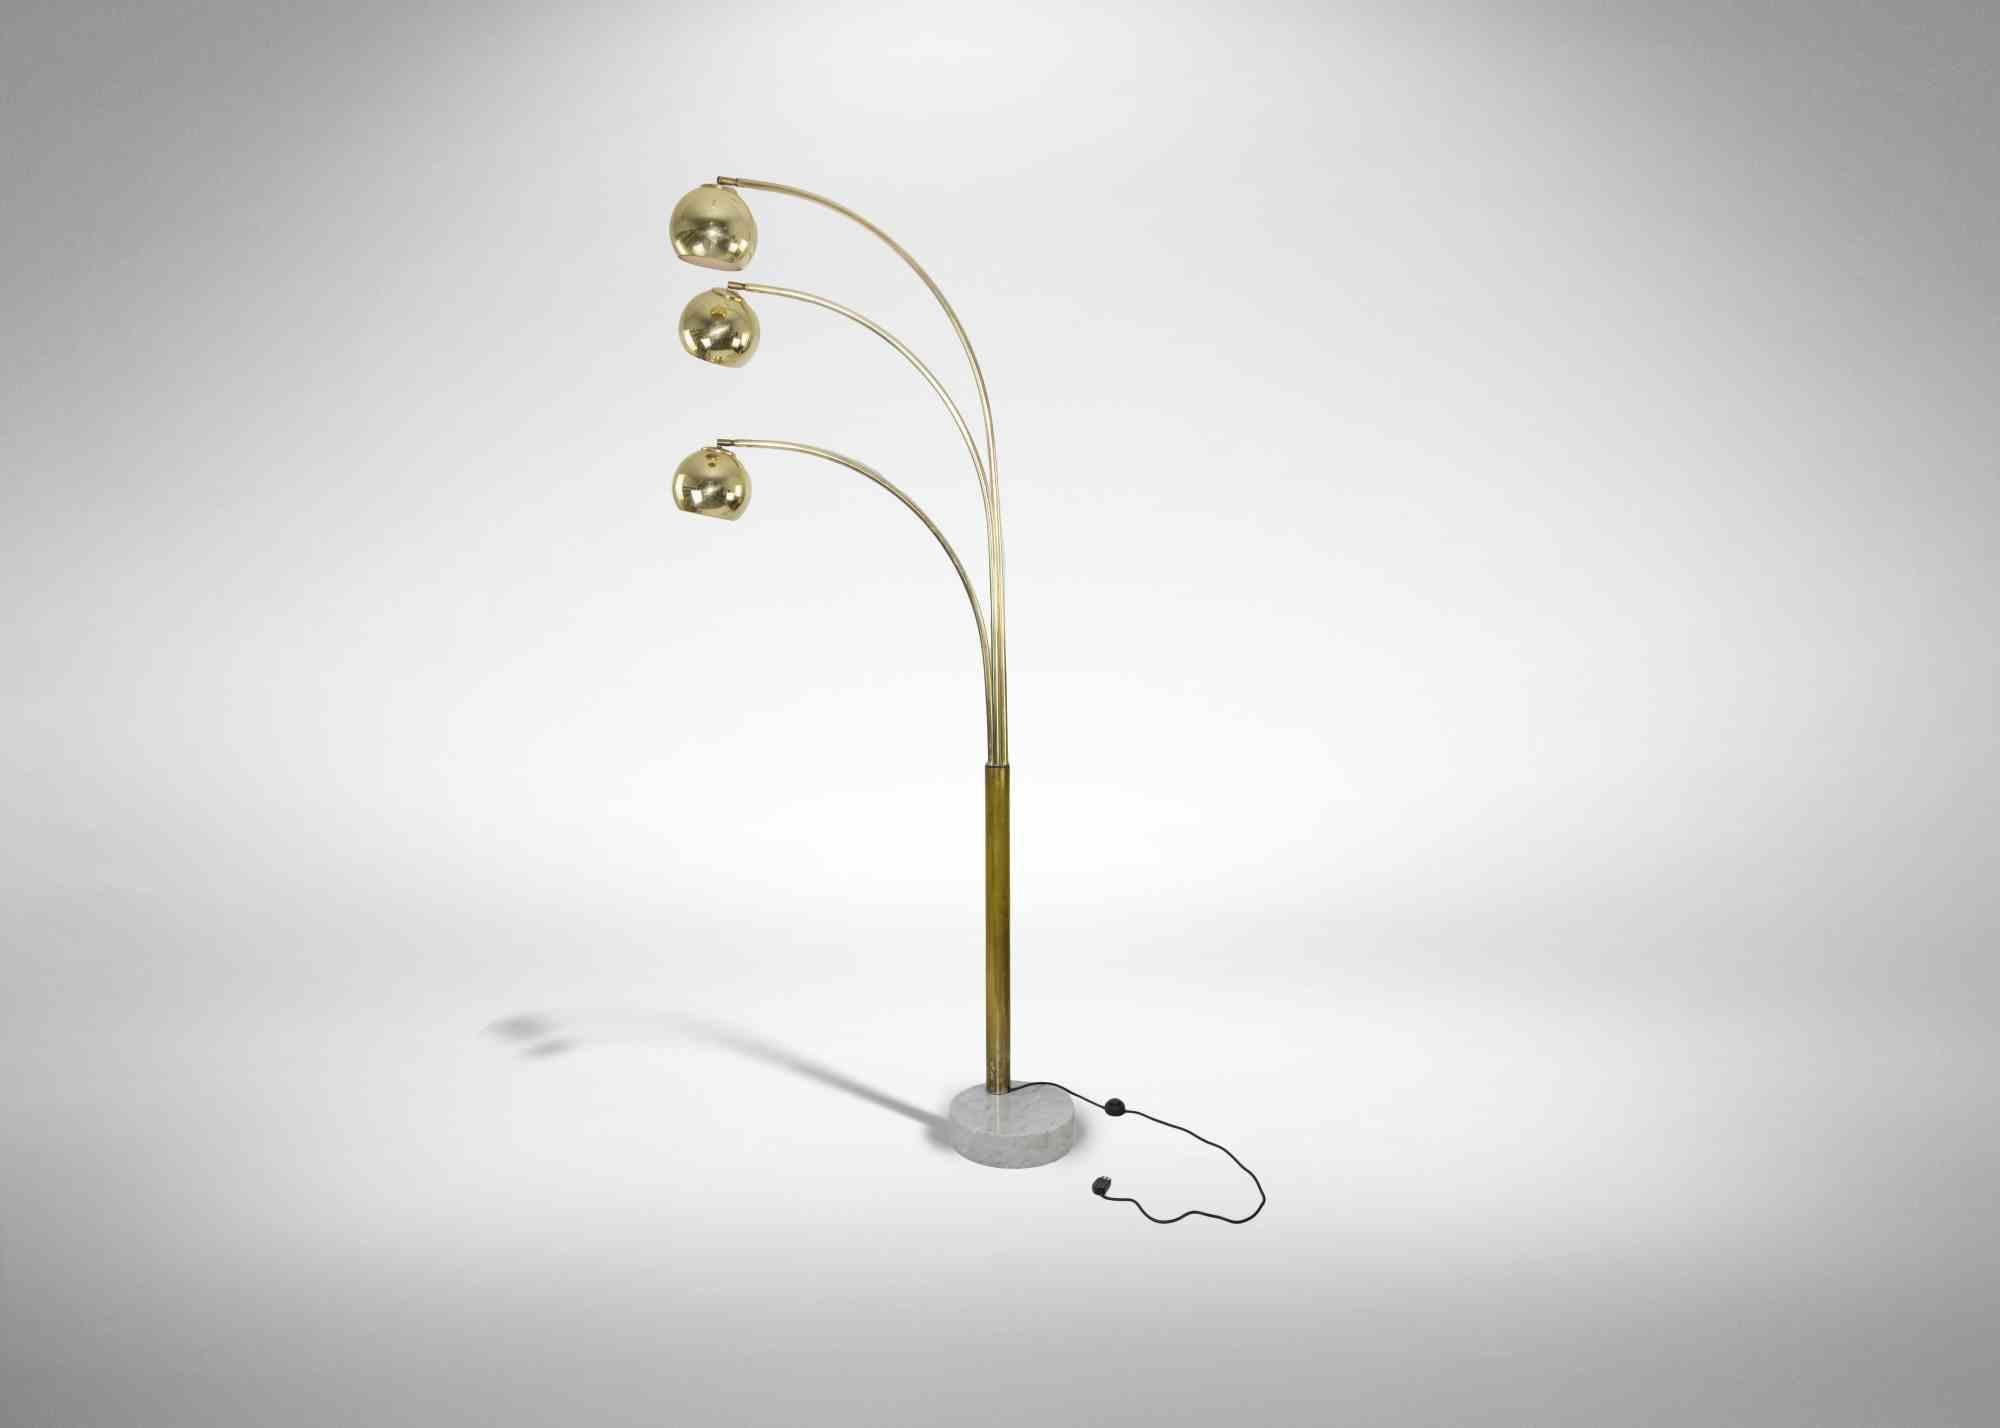 Vintage Floor Lamp realised by Goffredo Reggiani, Italy, in the 1970s.
Gilded Chrome Lamp with marble base.